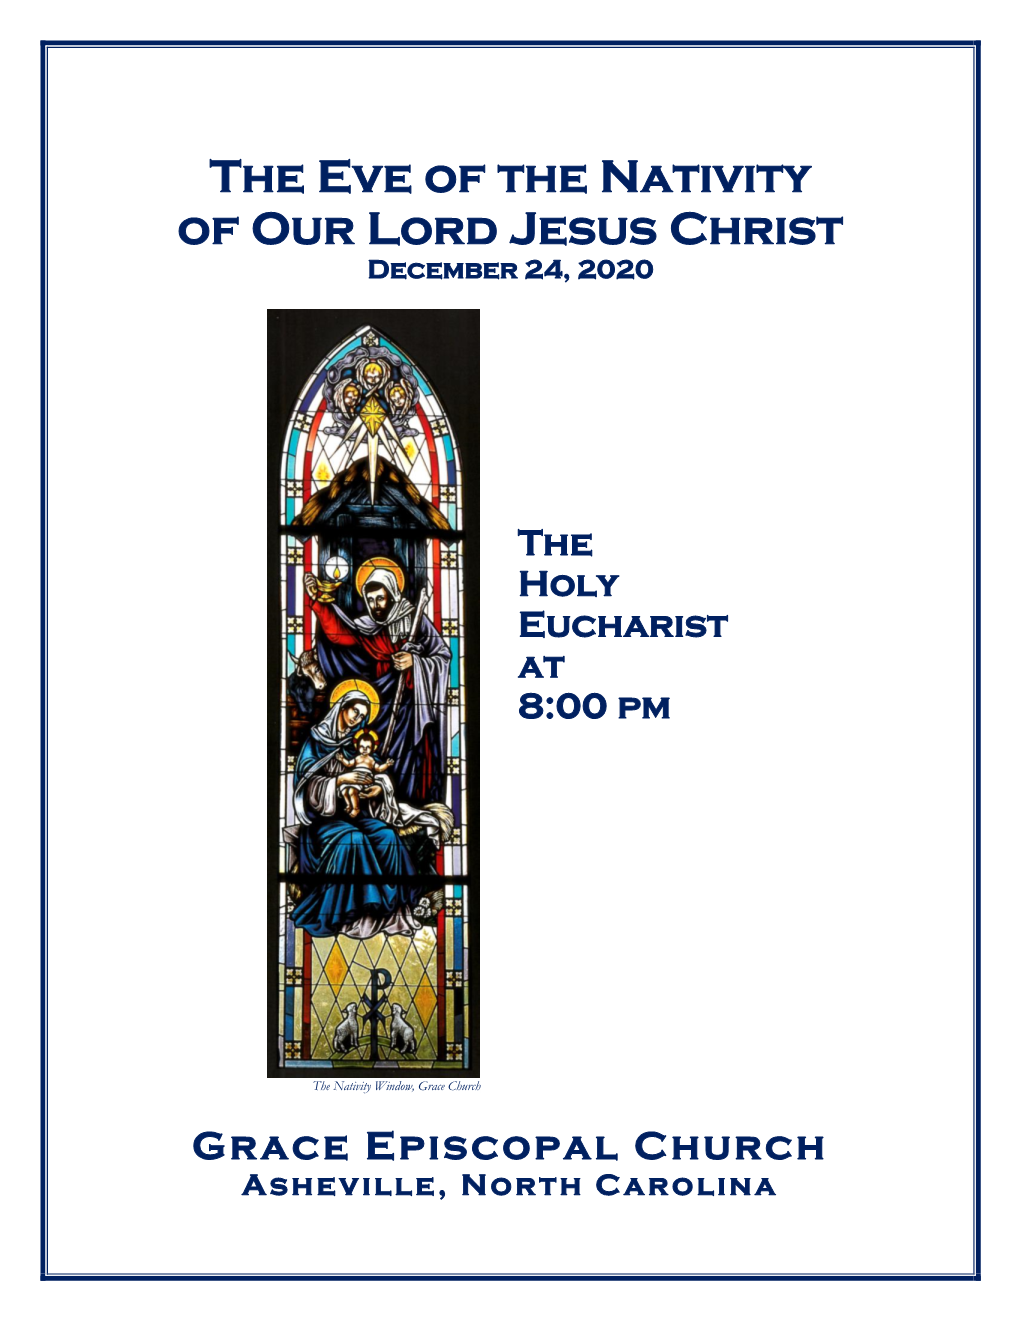 The Eve of the Nativity of Our Lord Jesus Christ December 24, 2020